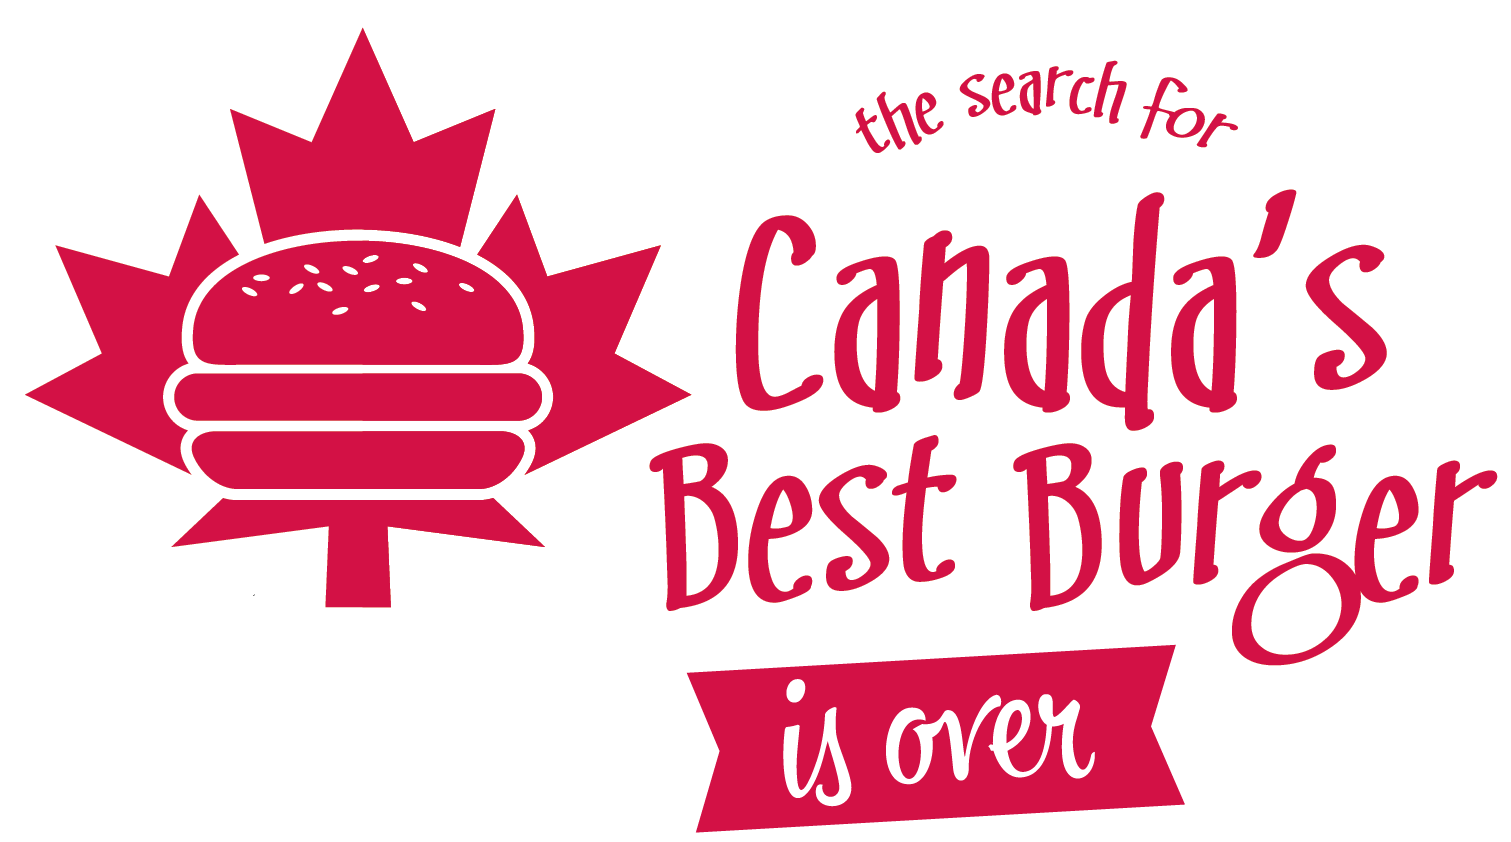 We Are Sending Cassandrea And Her Burger To The Canadian - Best Friends Border By York (1511x842)